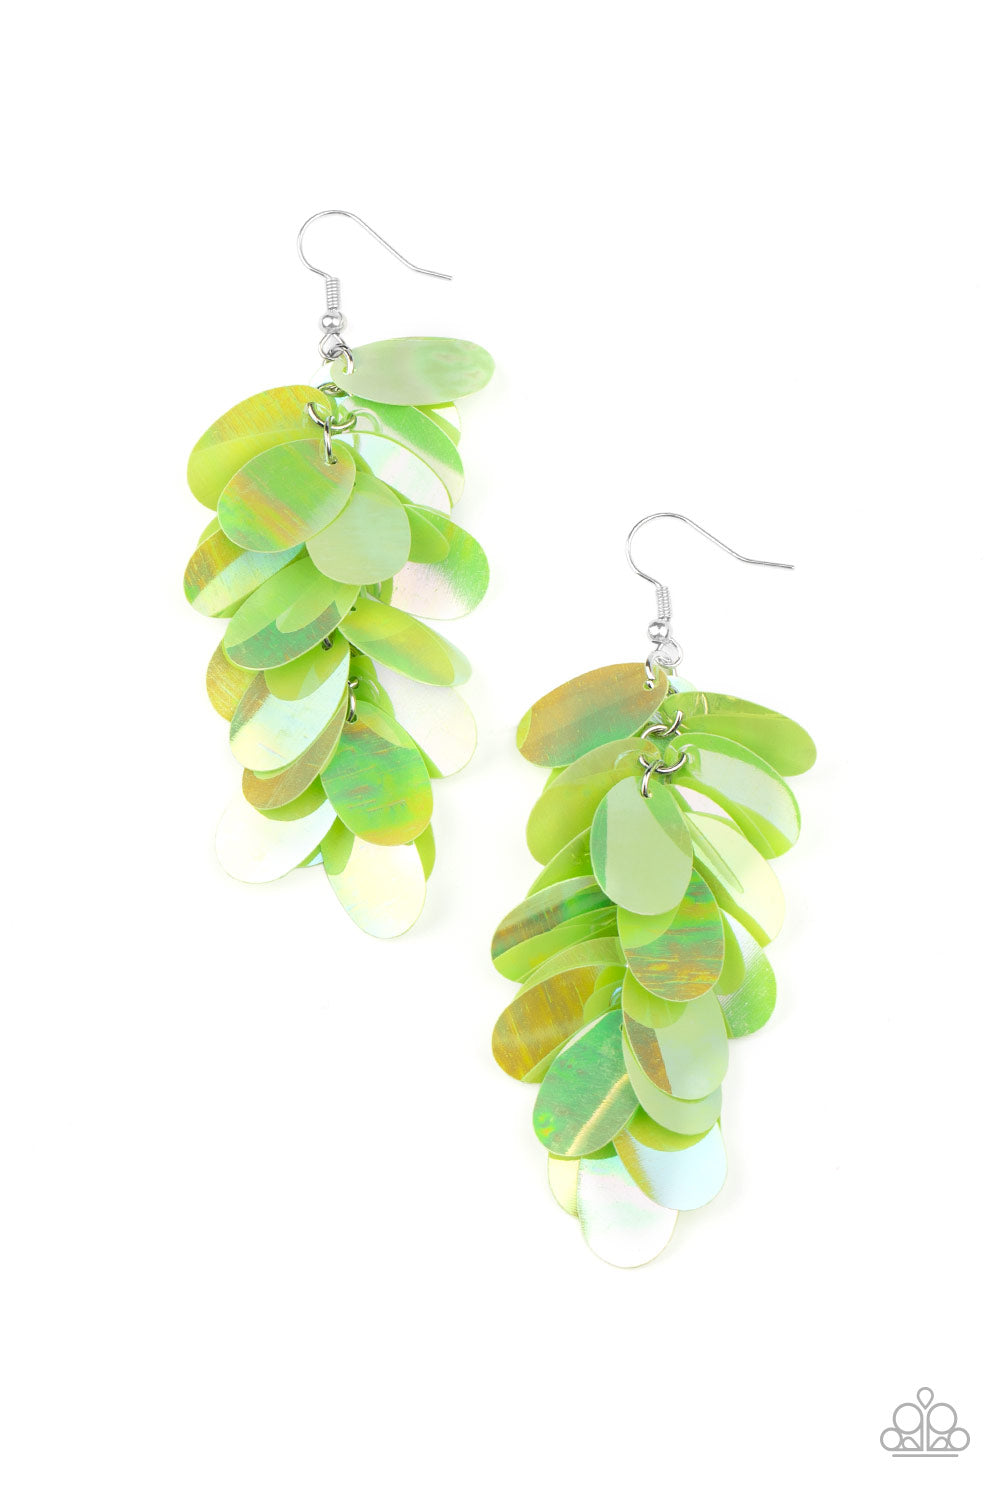 &lt;P&gt;Featuring an iridescent shimmer, oversized oval green sequins cascade from the ear, creating a playful fringe. Earring attaches to a standard fishhook fitting.&lt;/P&gt;  

&lt;P&gt; &lt;I&gt;  Sold as one pair of earrings. &lt;/I&gt;  &lt;/P&gt;


&lt;img src=\&quot;https://d9b54x484lq62.cloudfront.net/paparazzi/shopping/images/517_tag150x115_1.png\&quot; alt=\&quot;New Kit\&quot; align=\&quot;middle\&quot; height=\&quot;50\&quot; width=\&quot;50\&quot;/&gt;